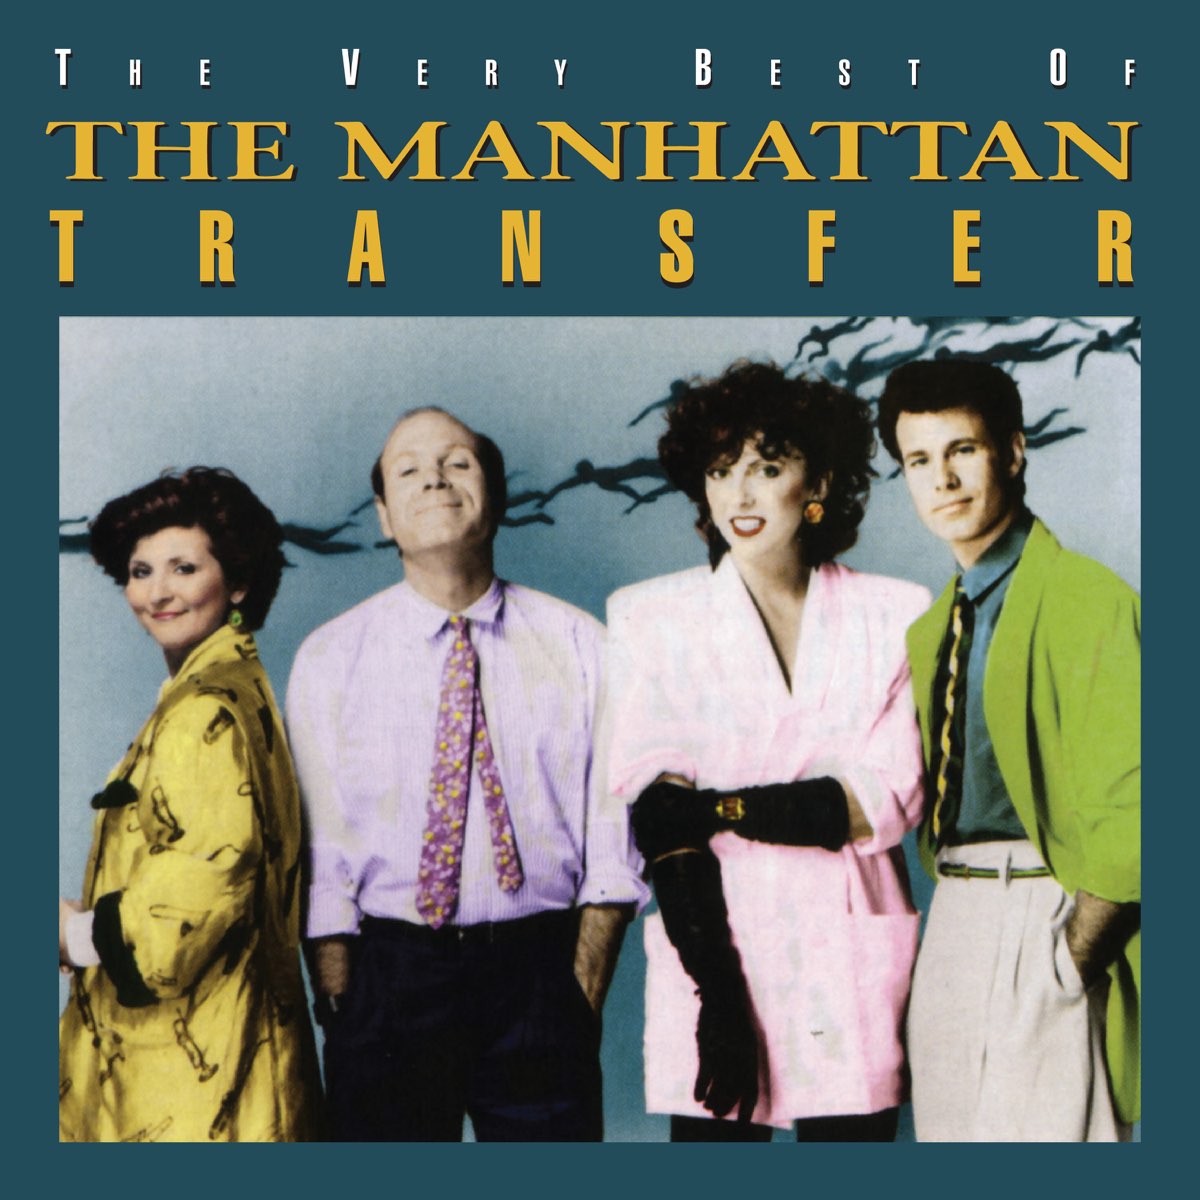 ‎The Very Best Of The Manhattan Transfer by The Manhattan Transfer on